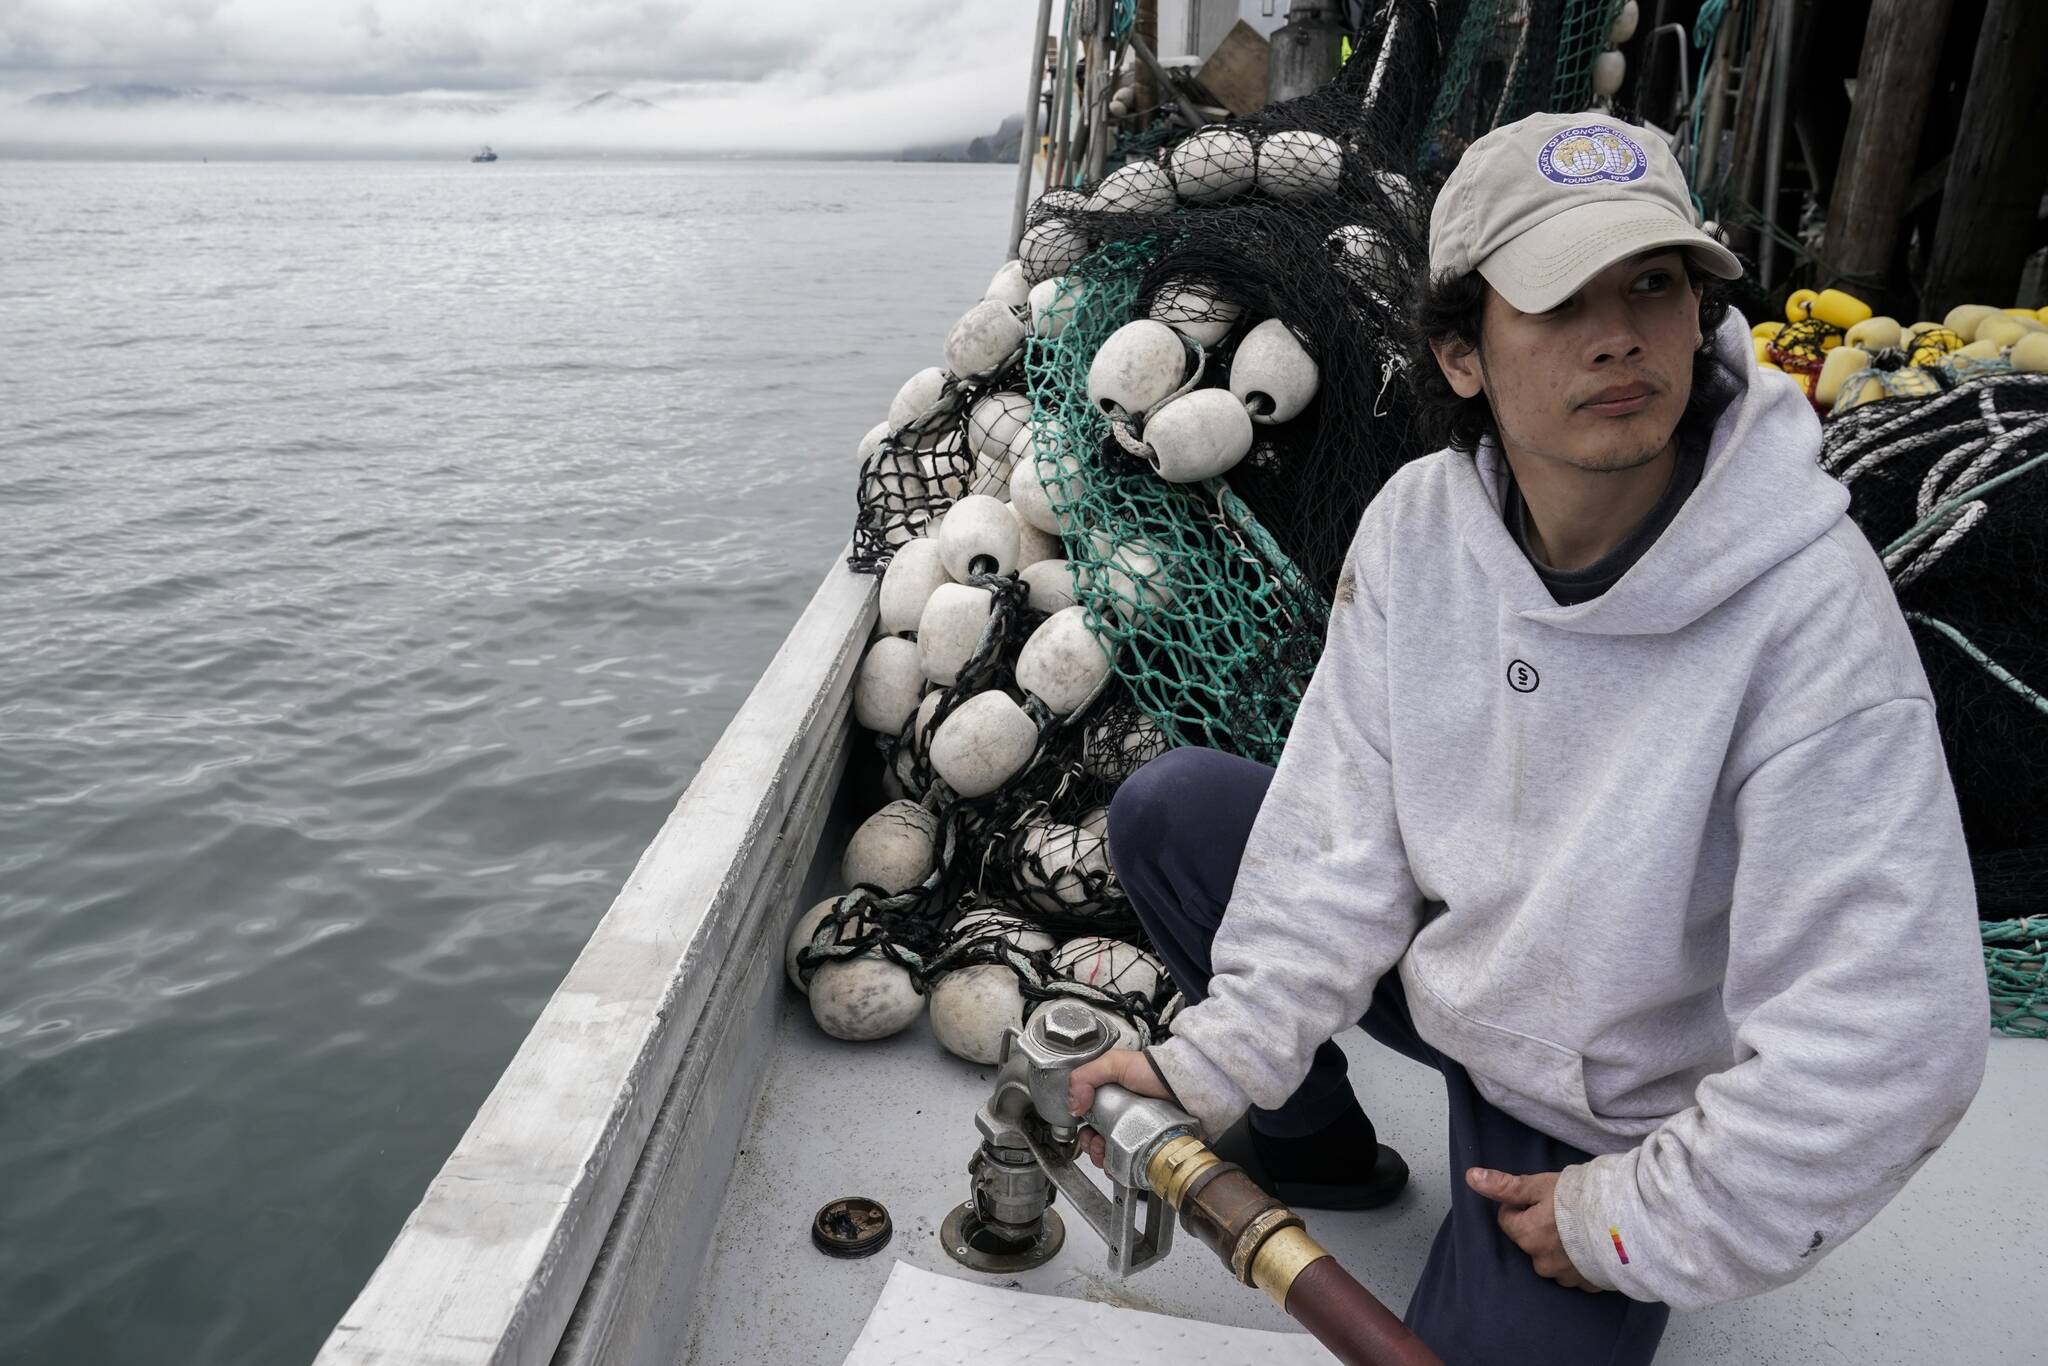 Juan Zuniga, a first-year deckhand on the Agnes Sabine, refuels the boat, Friday, June 23, 2023, in Kodiak, Alaska. For some young people who make the move to Alaska’s coasts, the industry is a way to make quick money, but not a forever job. “This is a pretty far place from where I live,” Zuniga said. “It’s a very big step out of my comfort zone.” (AP Photo/Joshua A. Bickel)